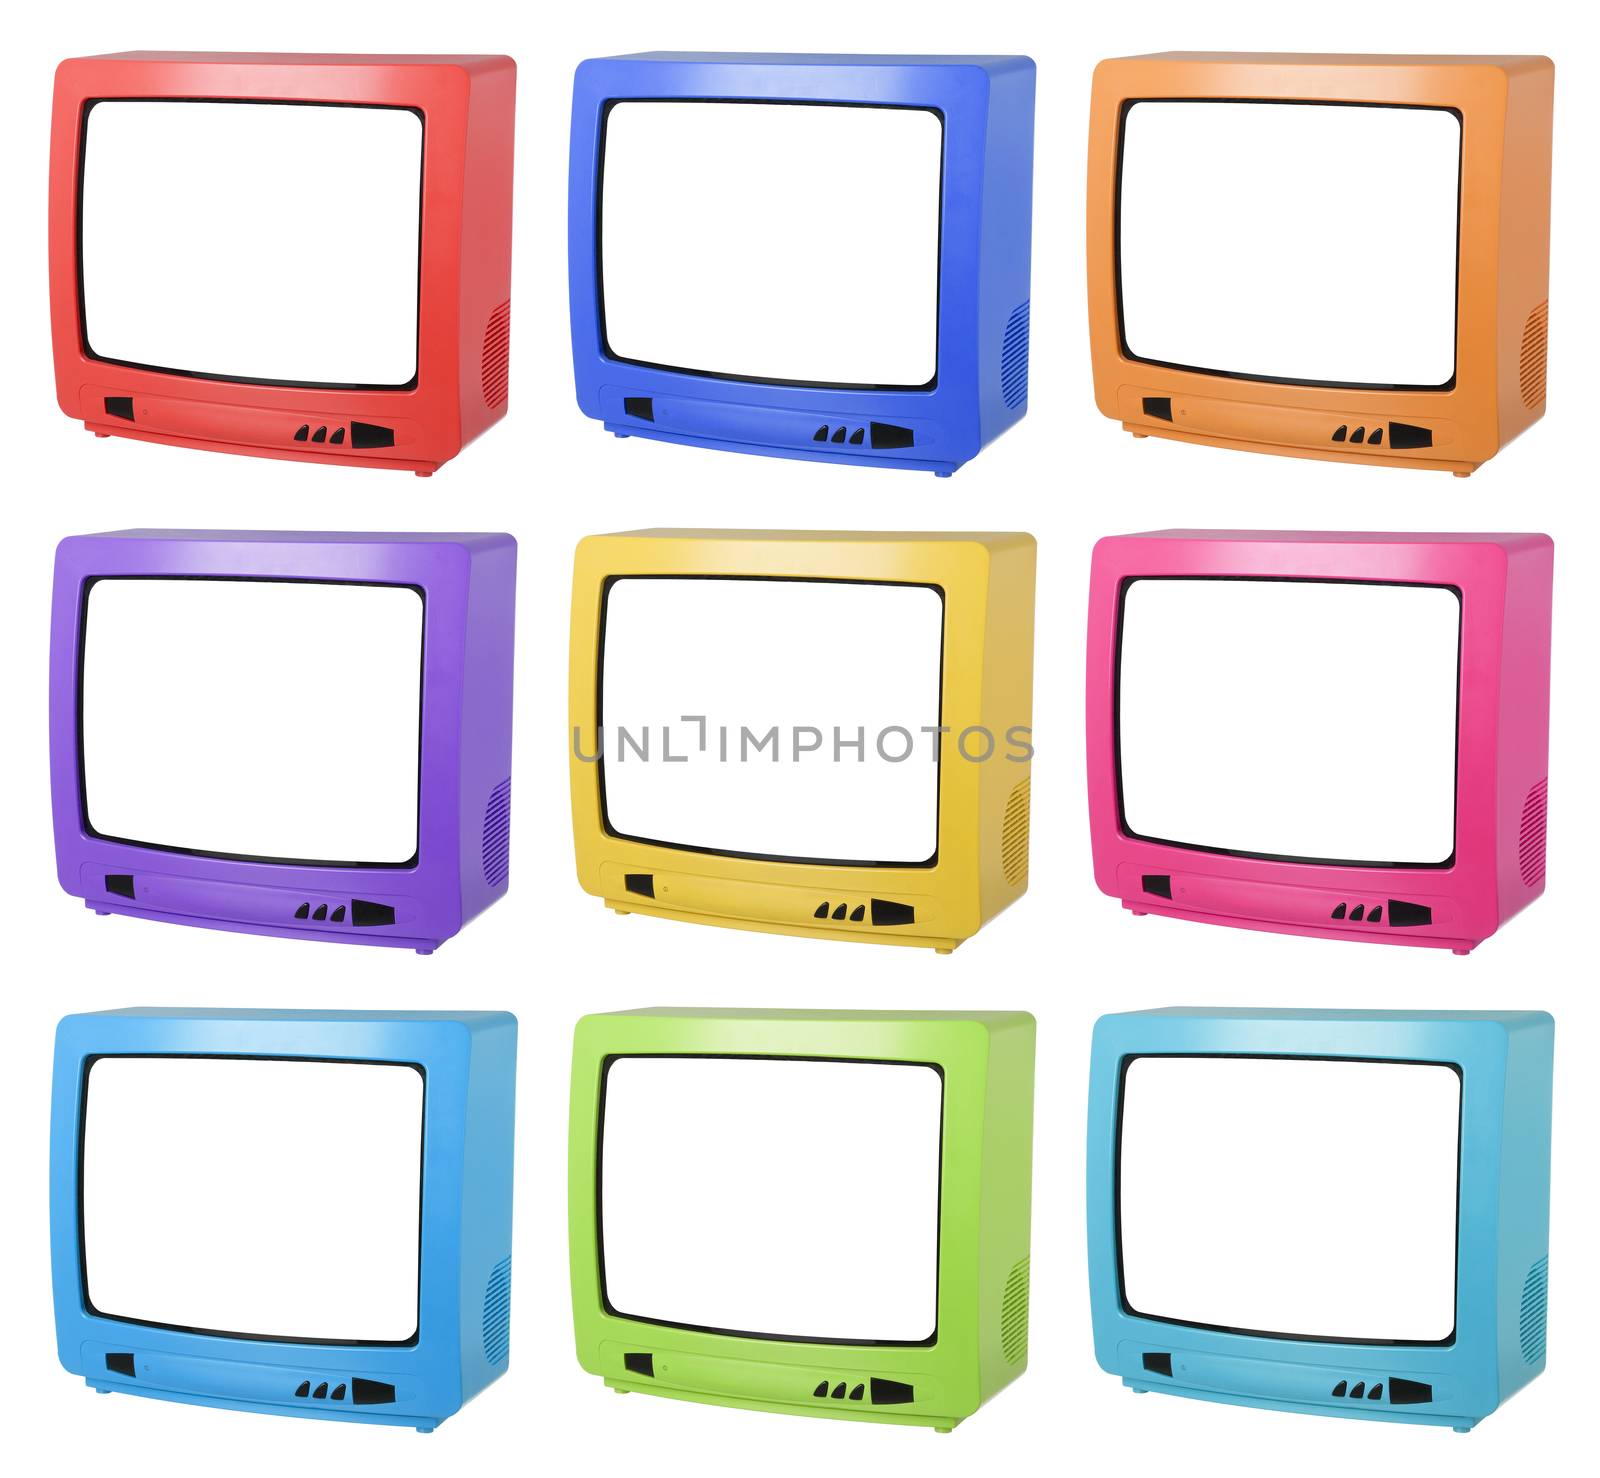 Collage of colored TV isolated on white background